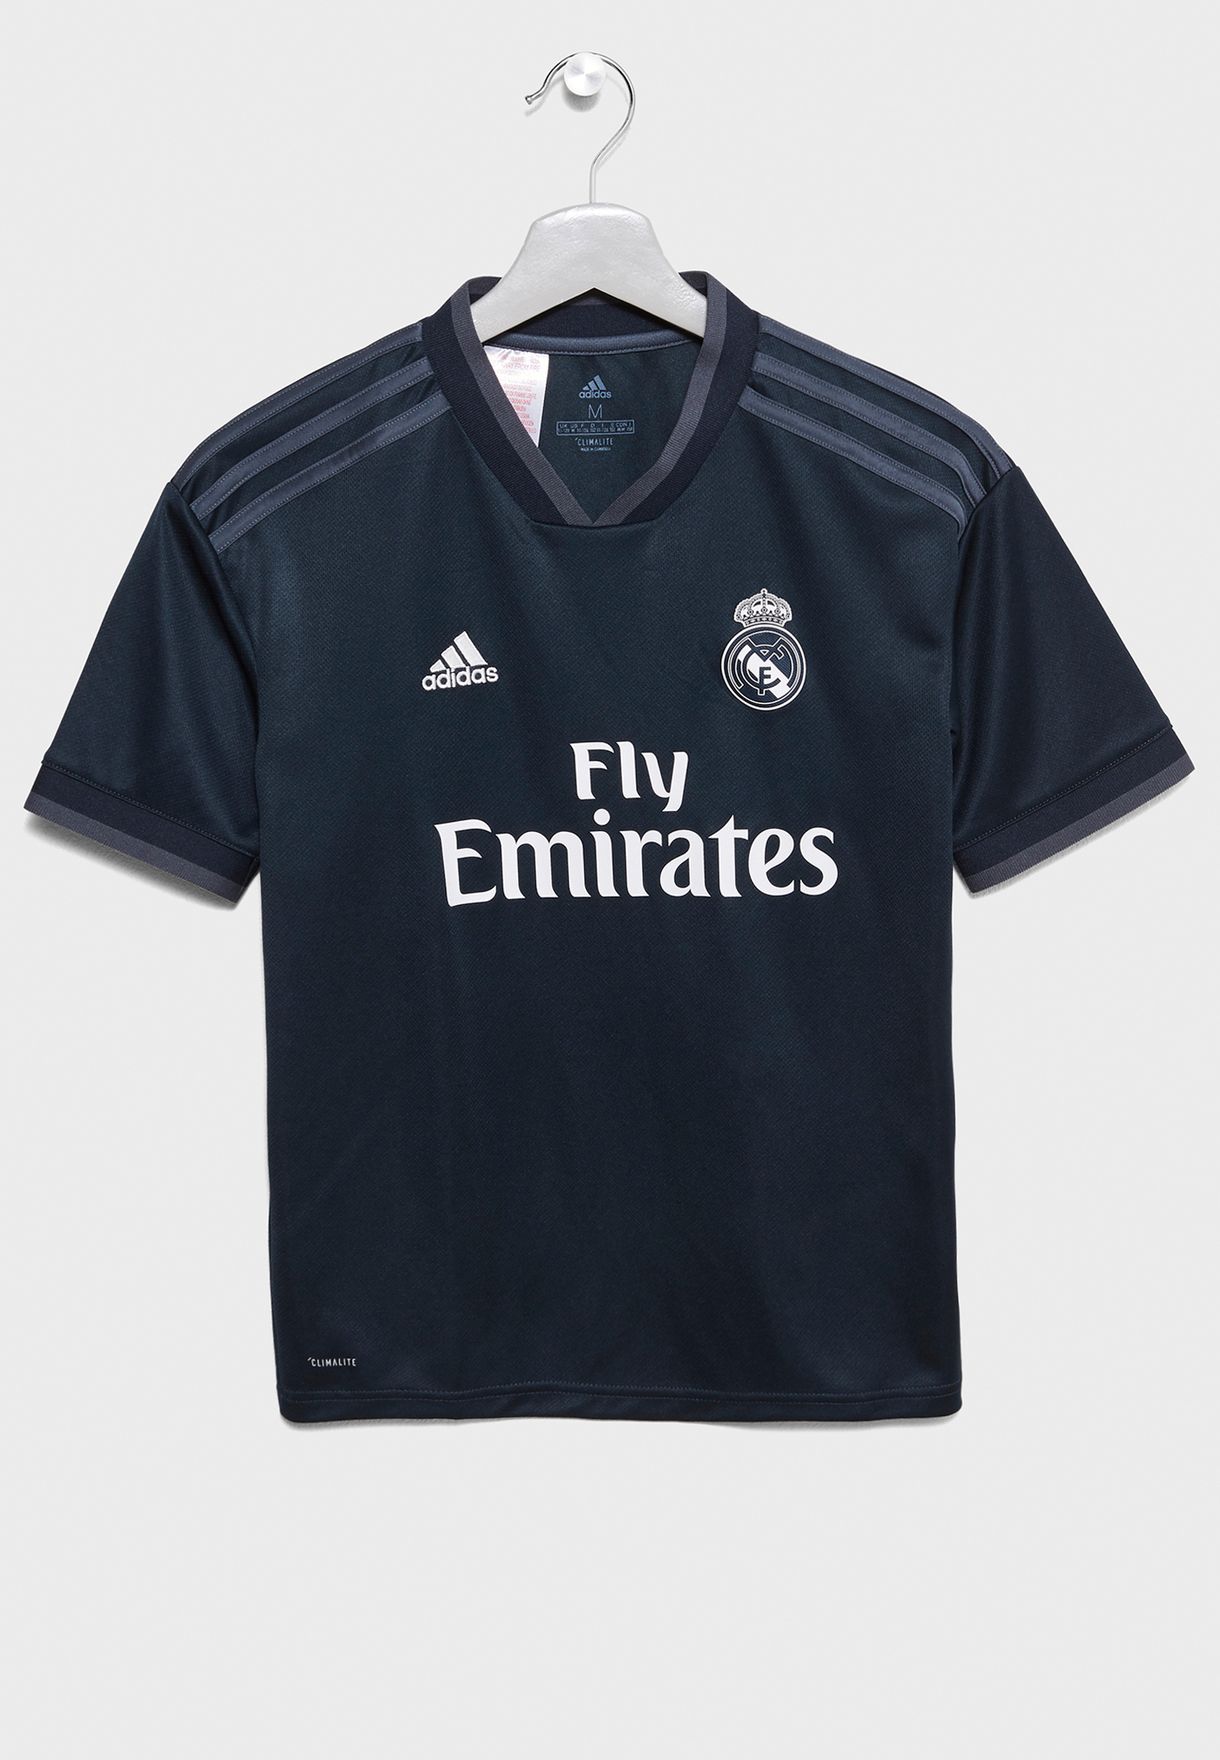 youth real madrid jersey